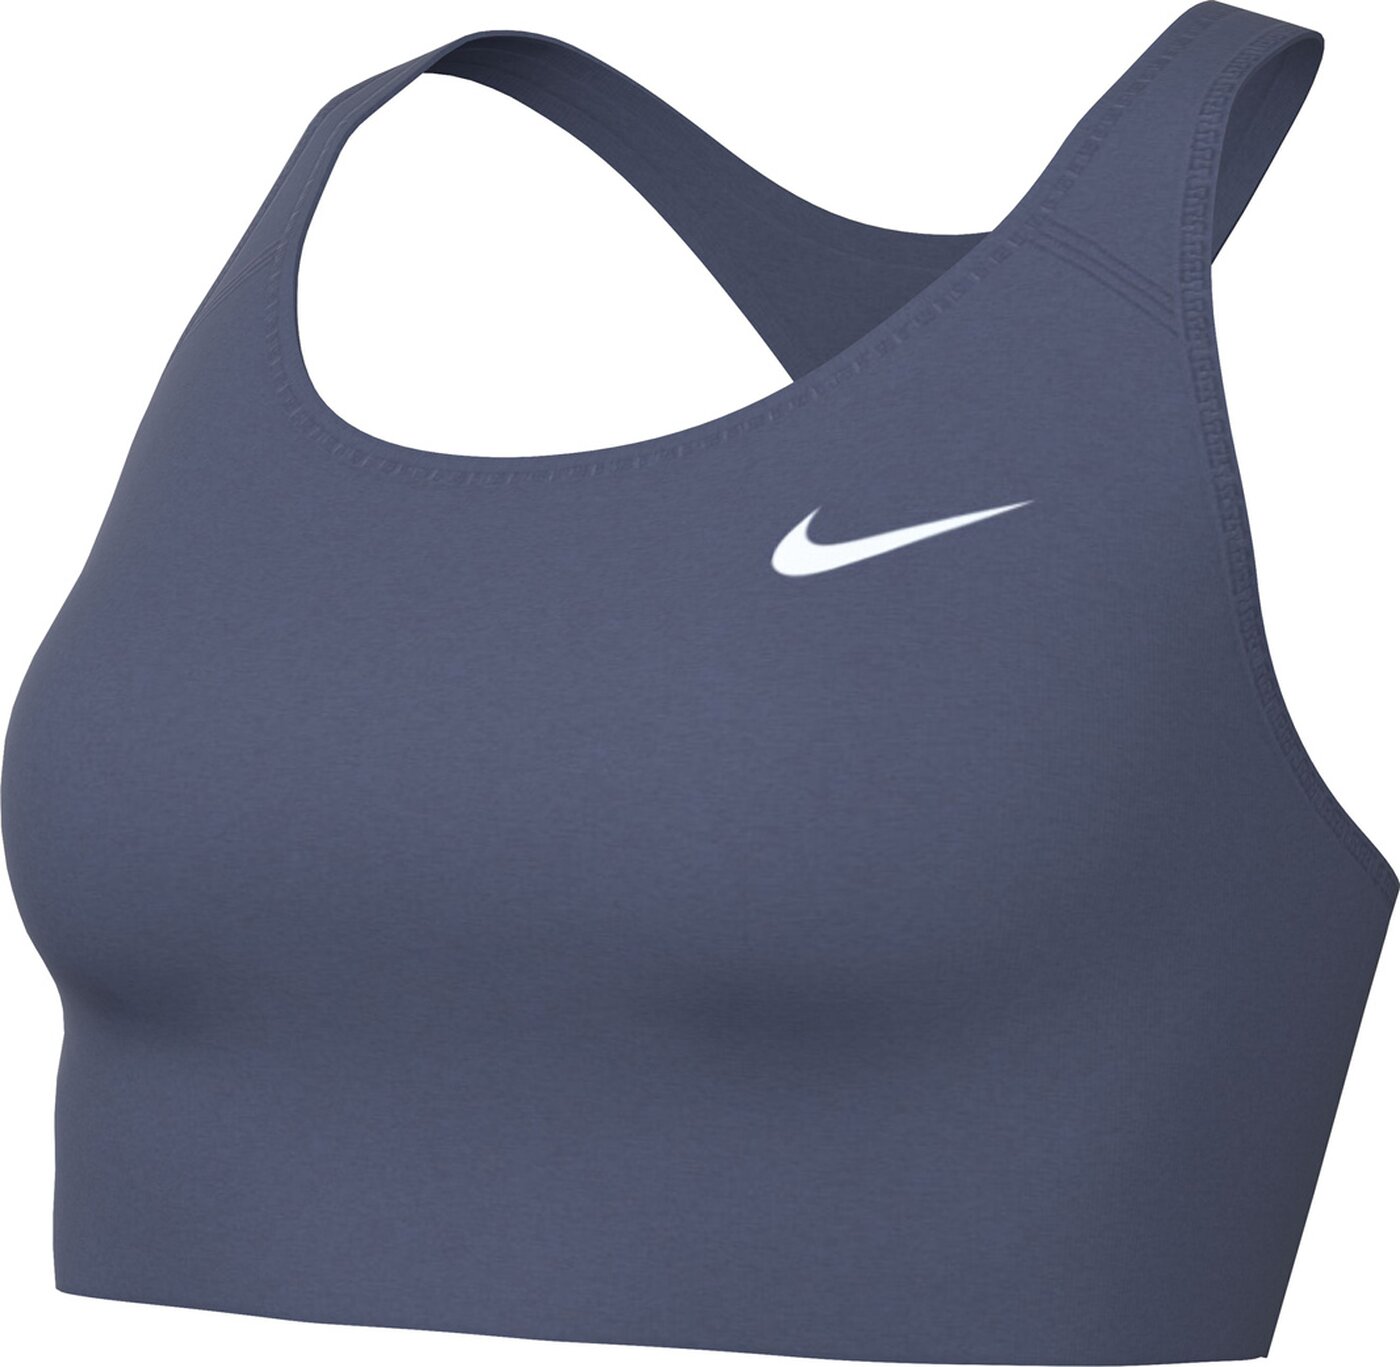 NIKE W NK DF SWSH NONPDED BRA 491 DIFFUSED BLUE/WHITE online kaufen